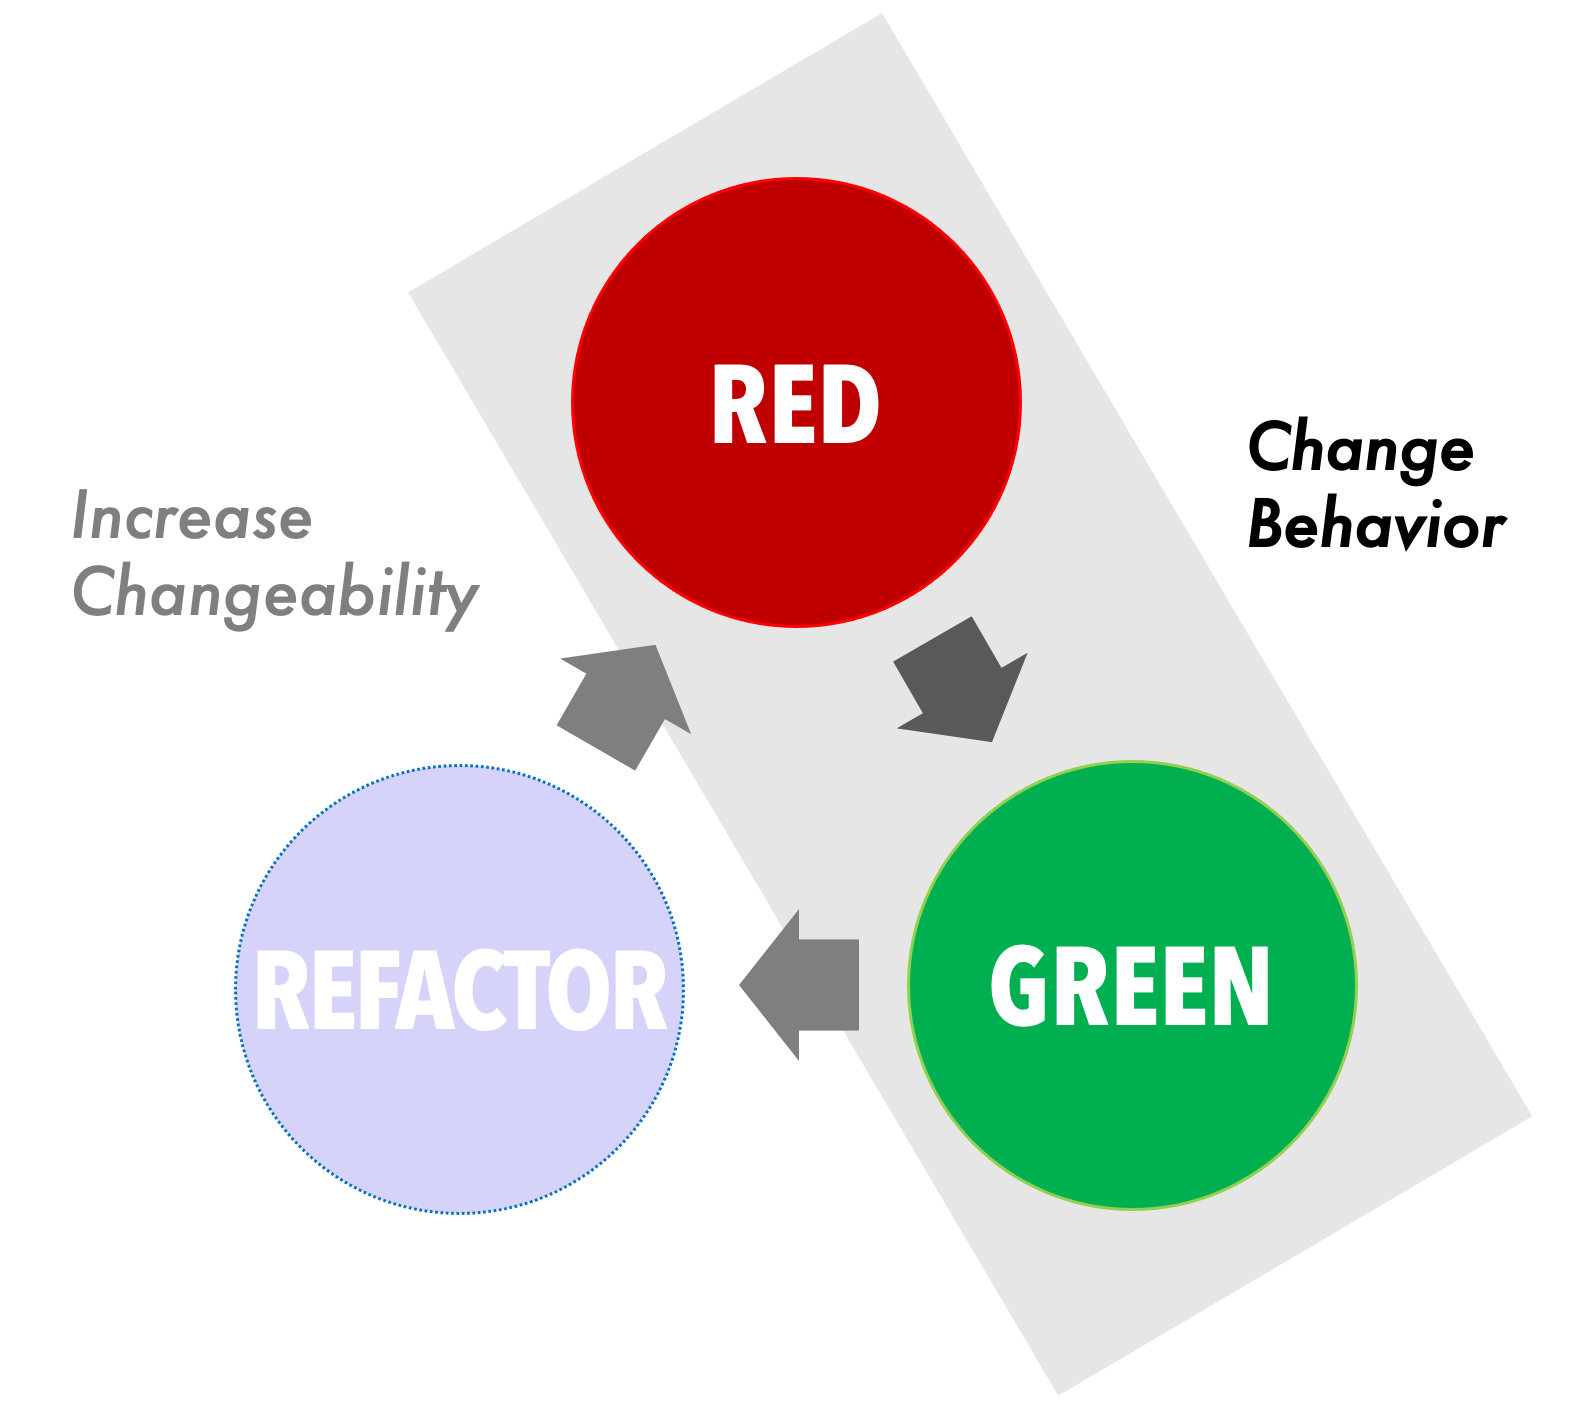 TDD Cycle: circles with the words Red (colored red), Green (colored green), and Refactor (colored pale light blue) written inside and arrows pointing from one to the next in a clockwise order. Red and Green circles are highlighted and have text to the right: 'Change Behavior'. Refactor circle has text above it: 'Increase Changeability'.